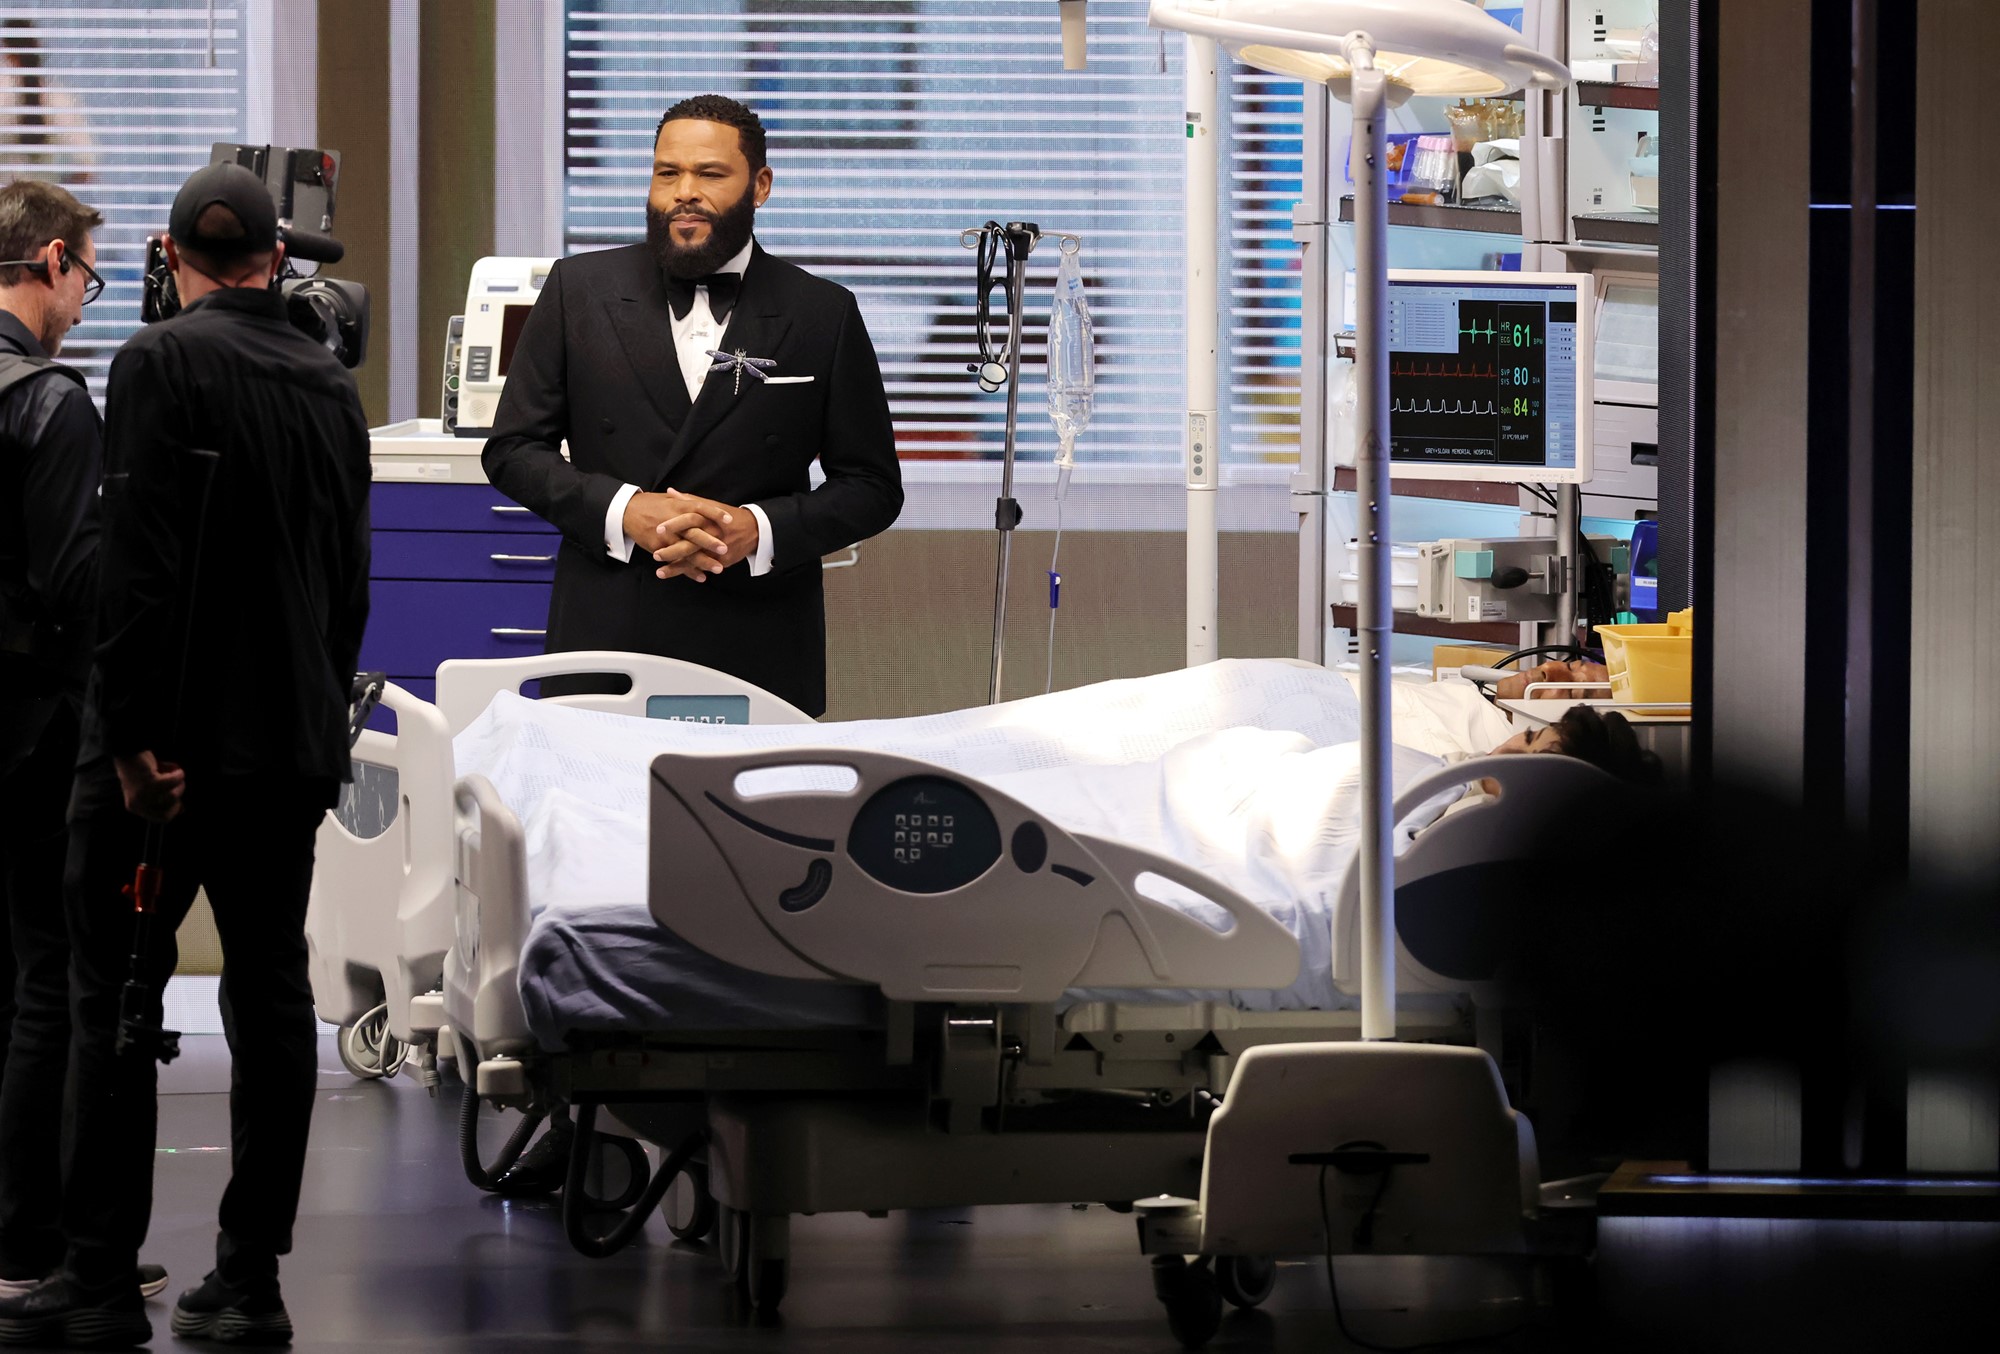 Anthony Anderson in front of a hospital bed.